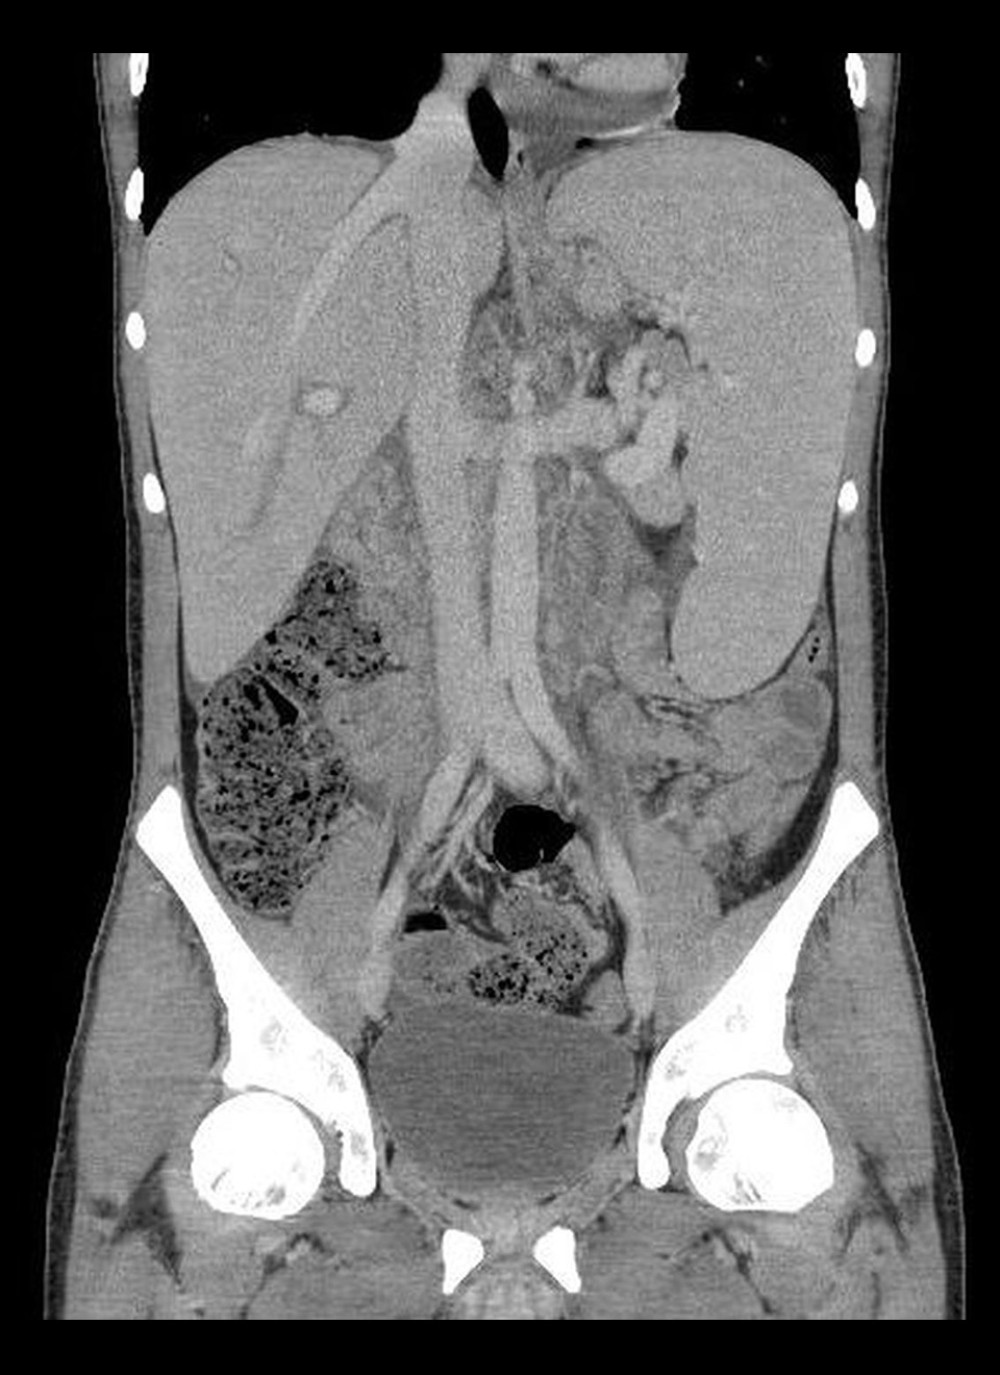 Computed tomography (coronal plane) of the abdomen shows hepatosplenomegaly. Enlargement of the liver up to 23 cm, and spleen up to 23 cm with the presence of a subcapsular rupture in the lower pole of about 13 mm, and numerous retroperitoneal enlarged lymph nodes. (Alteris ver. 1.0.9.97 DicomVision).